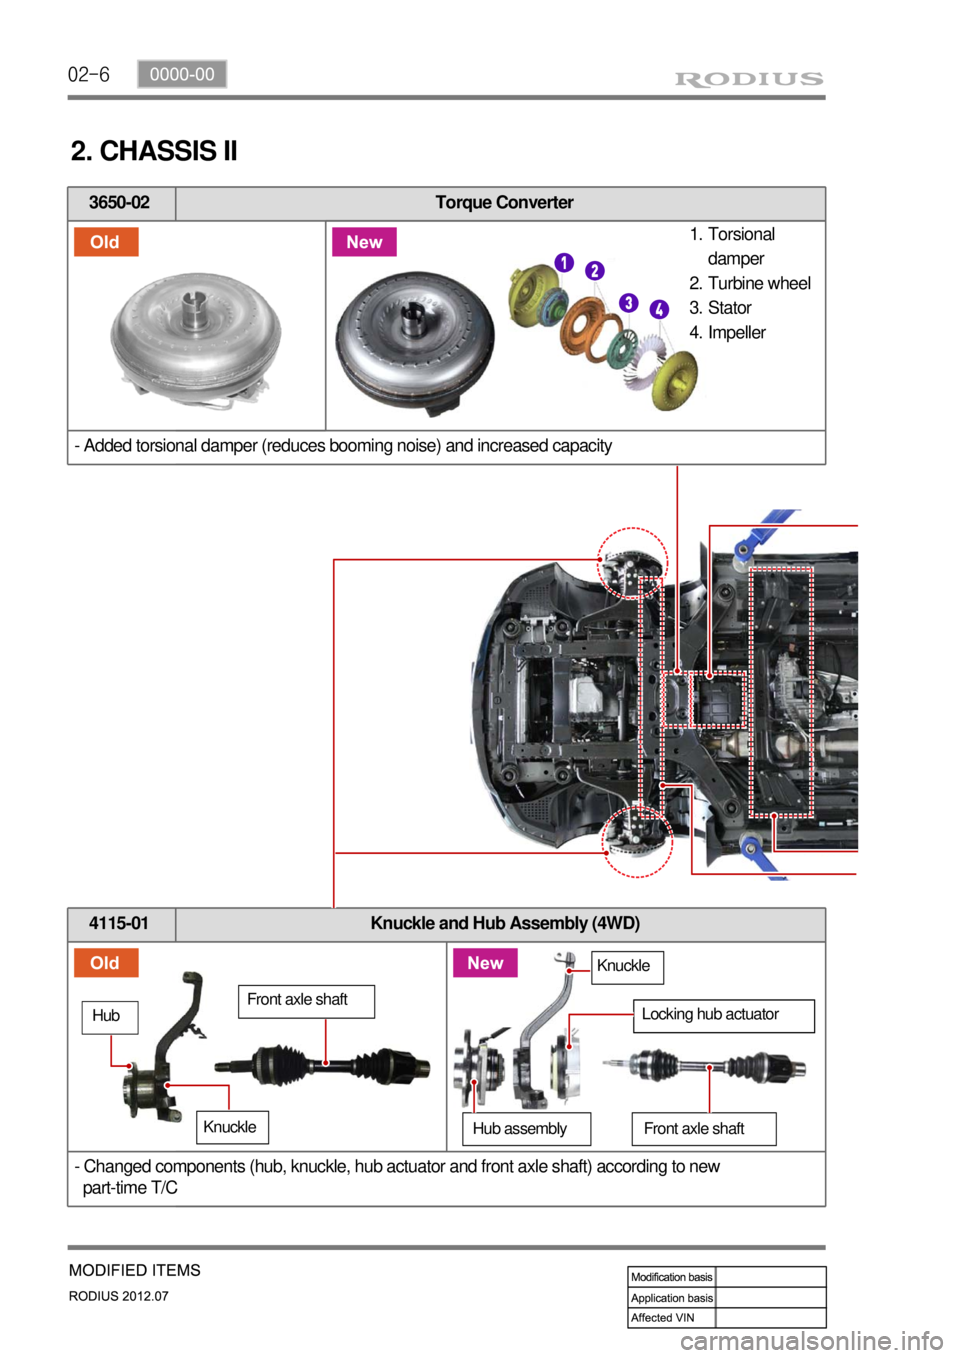 SSANGYONG RODIUS 2012  Service Manual 02-6
3650-02 Torque Converter
- Added torsional damper (reduces booming noise) and increased capacity
2. CHASSIS II
4115-01 Knuckle and Hub Assembly (4WD)
- Changed components (hub, knuckle, hub actua